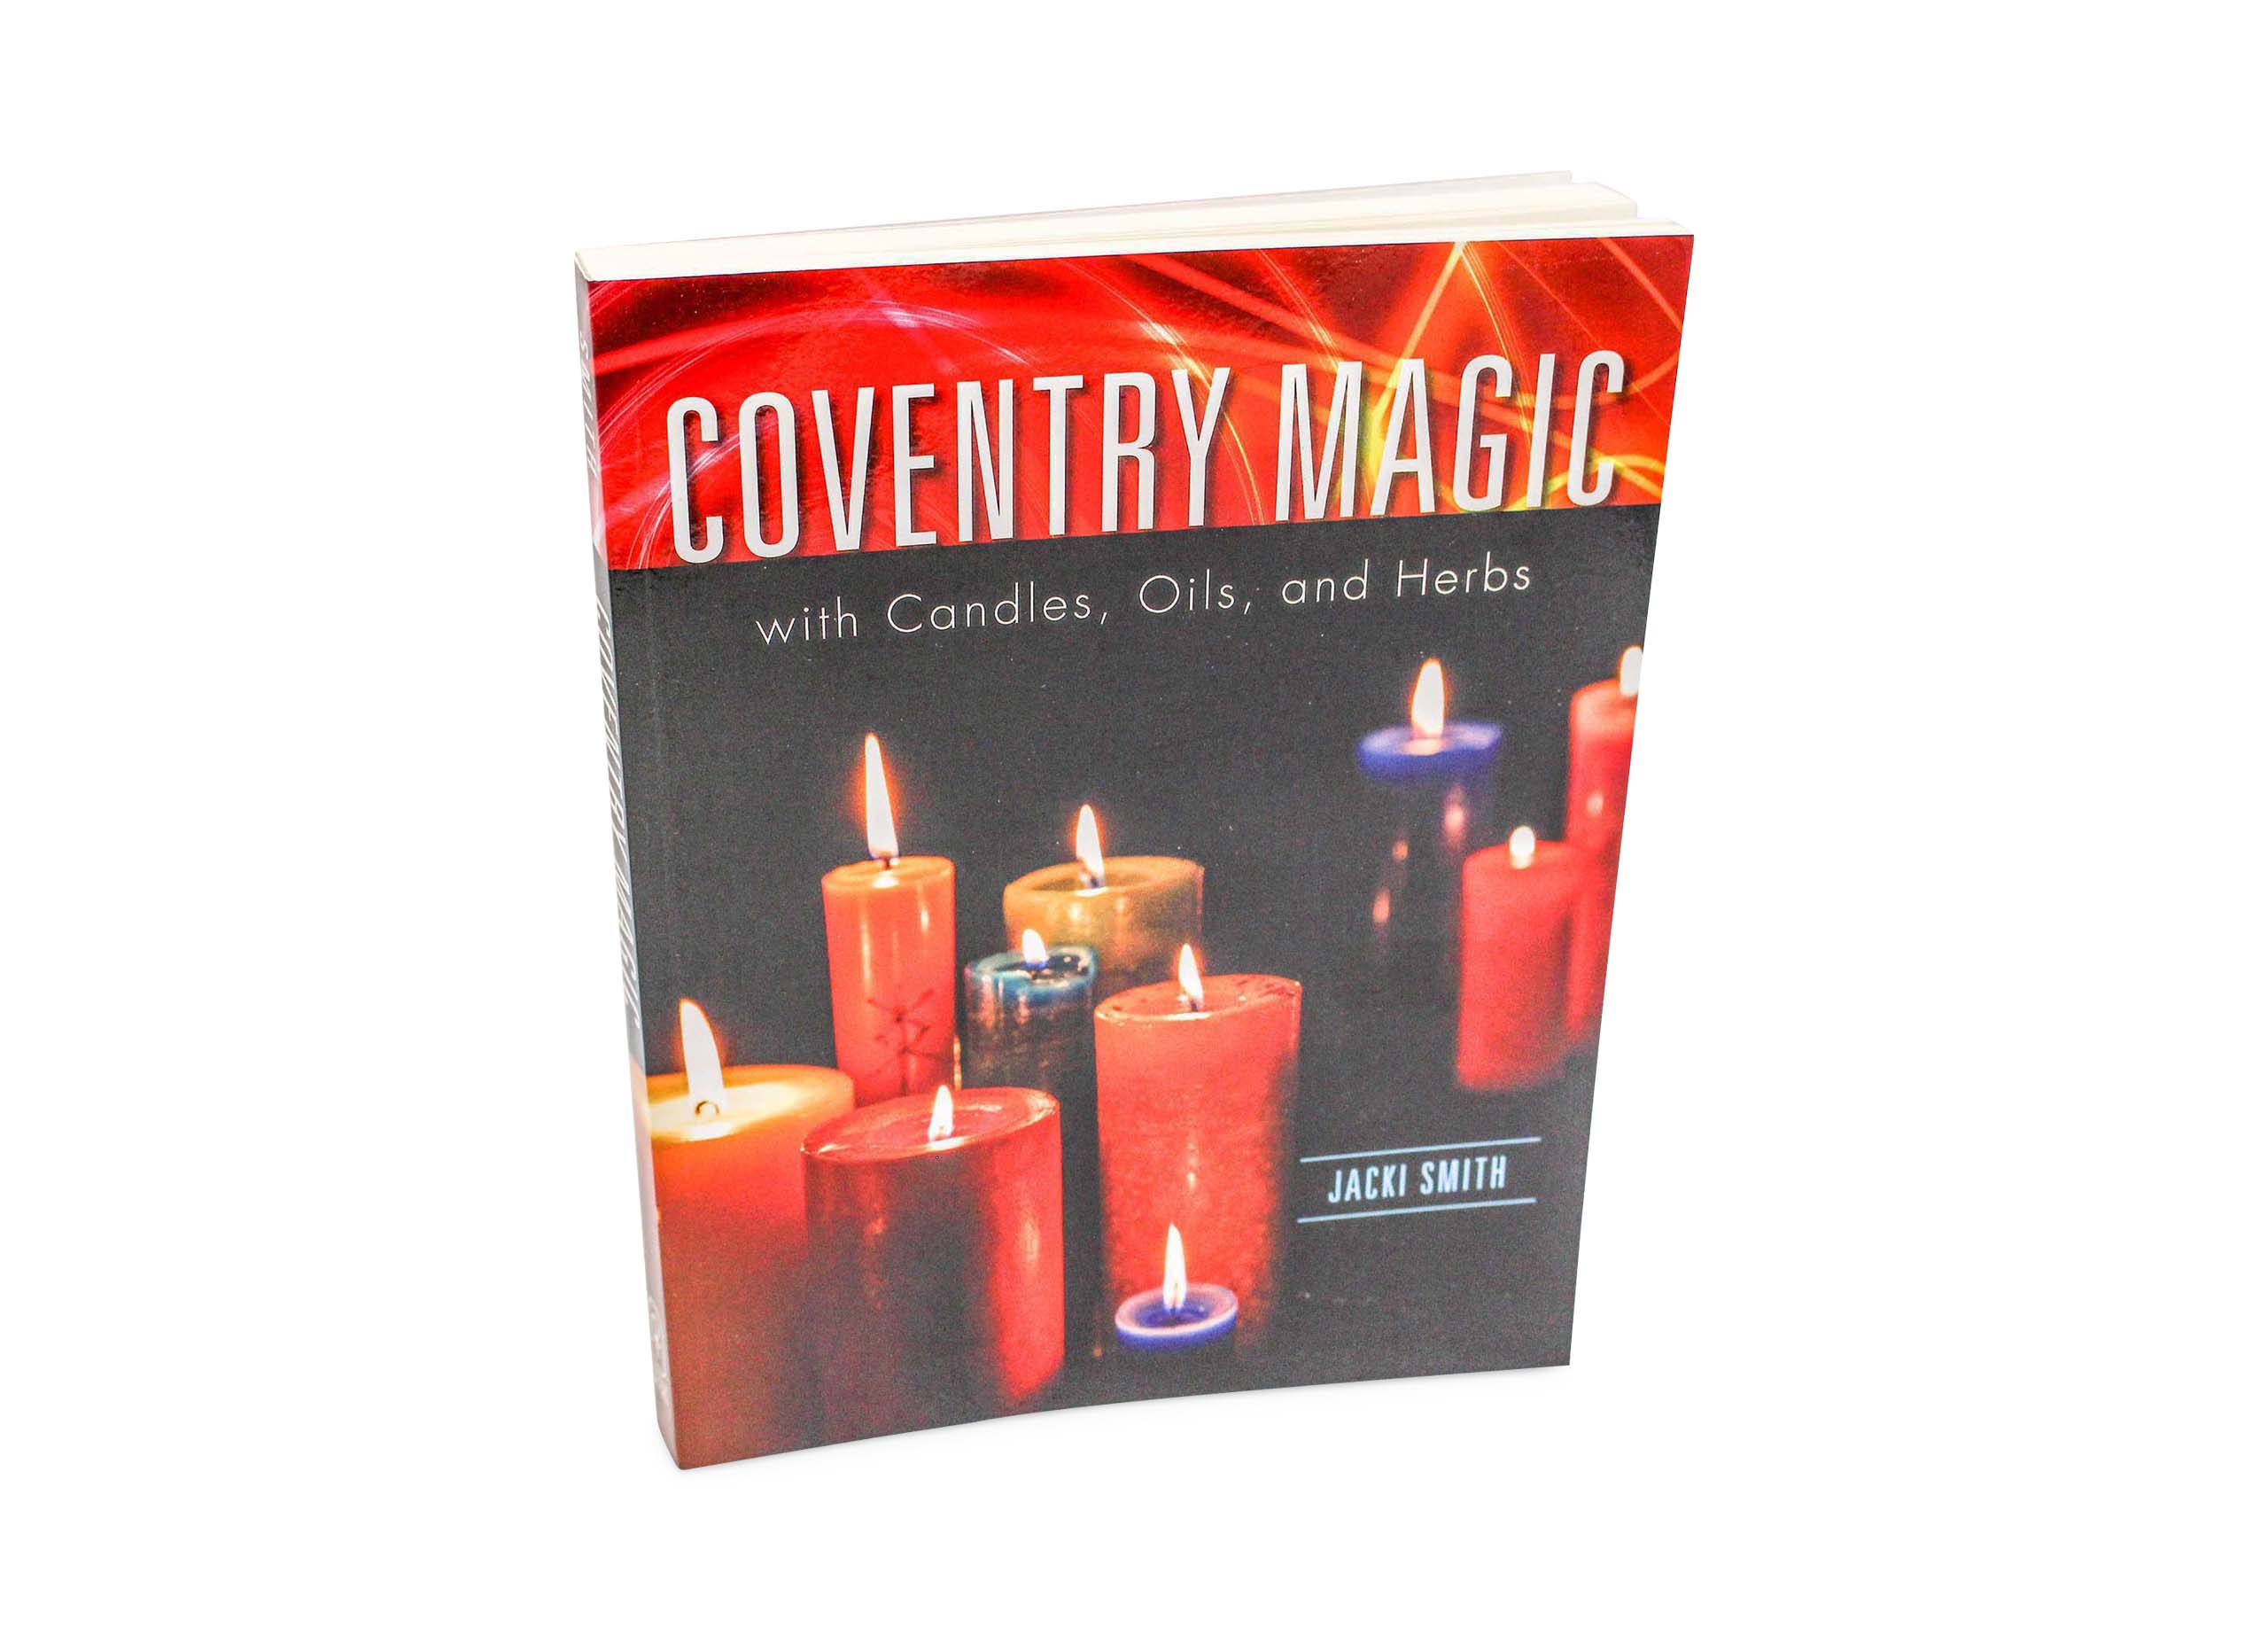 Coventry Magic with Candles, Oils, and Herbs Book - Crystal Dreams